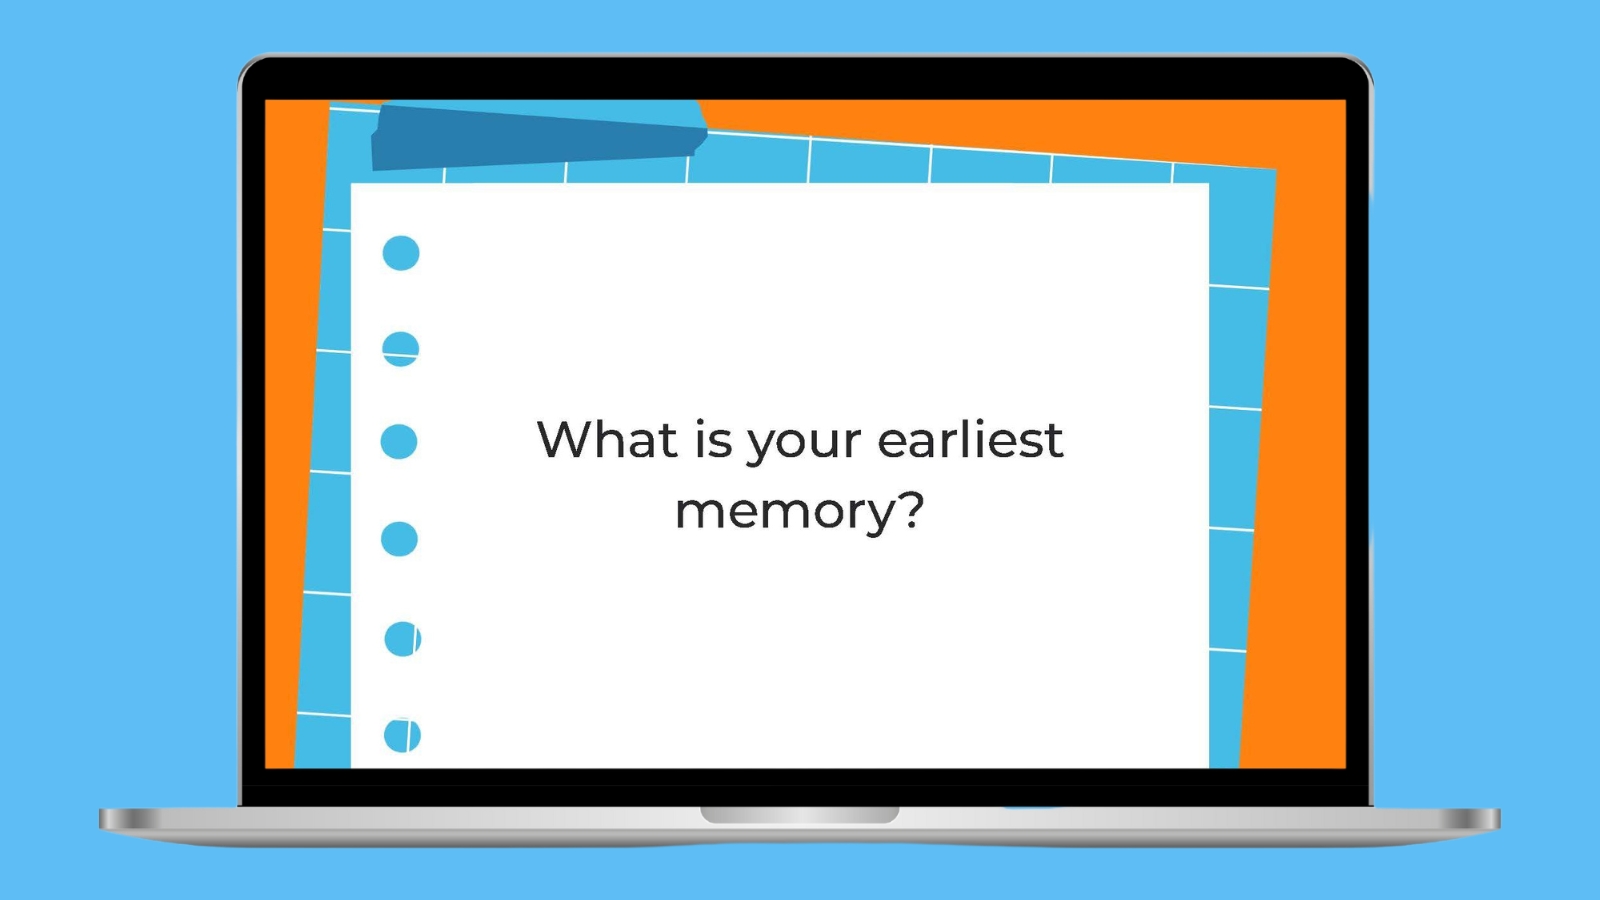 What is your earliest memory?